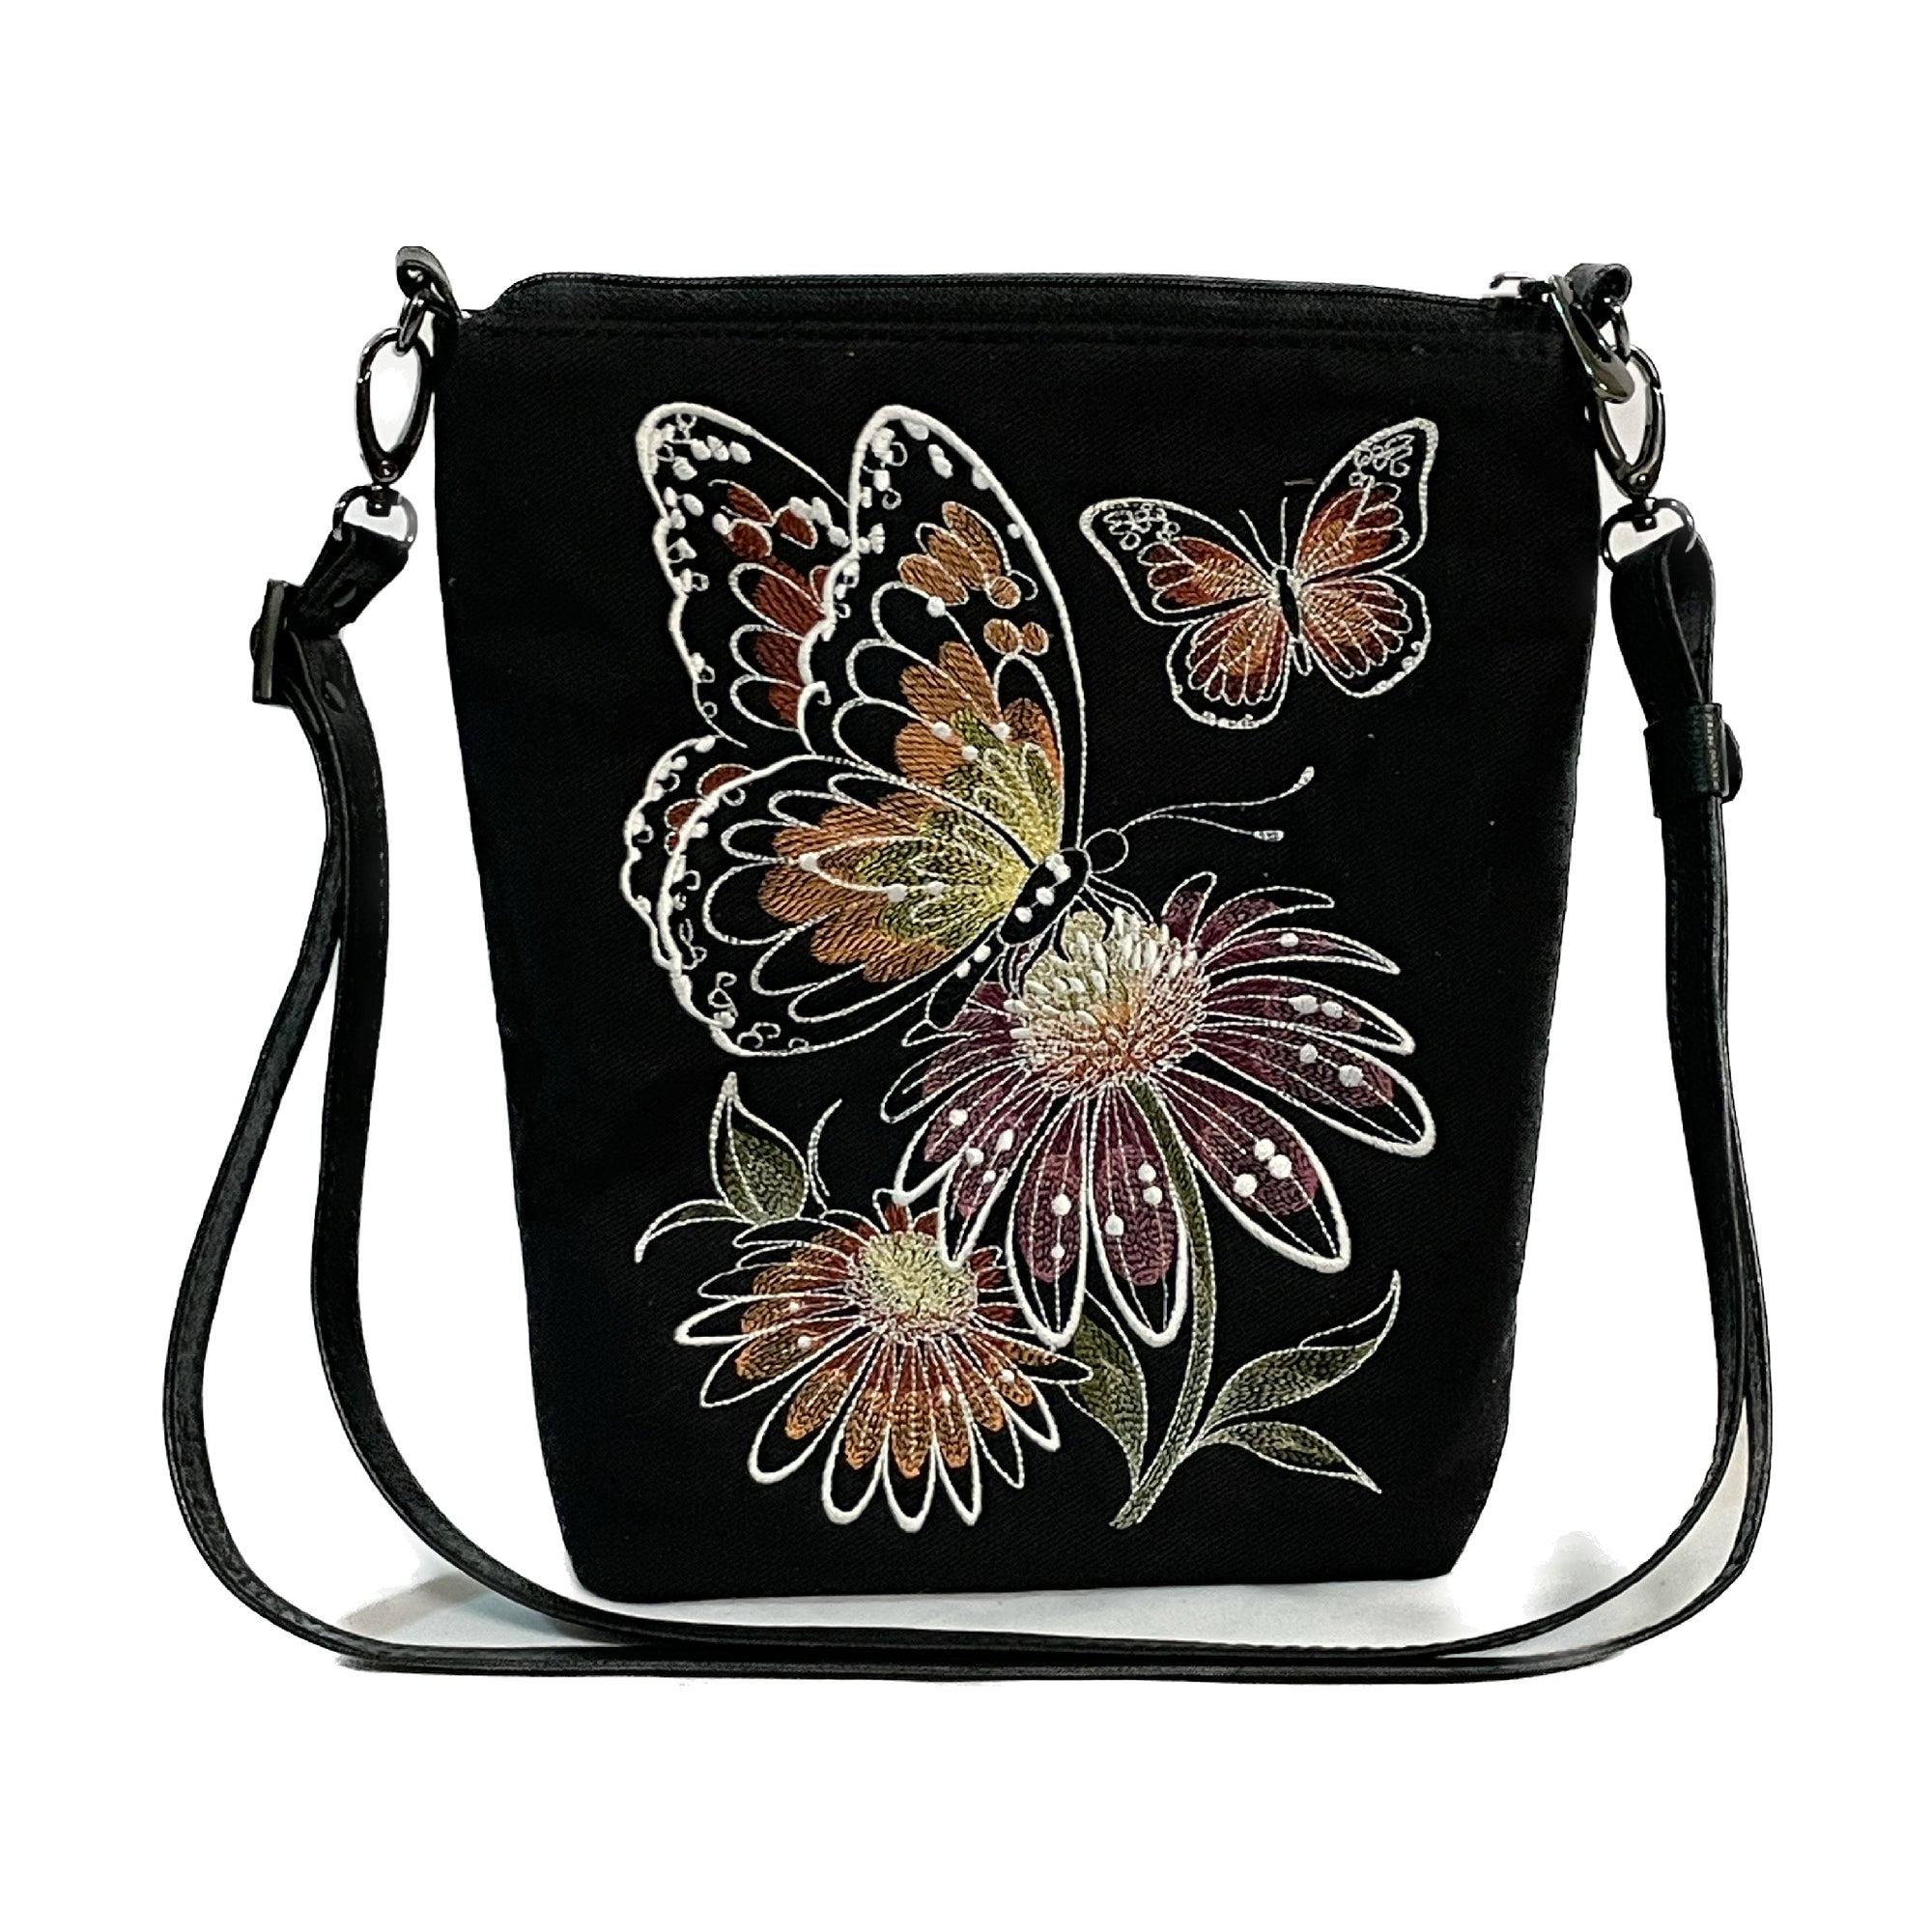 Claudia Crossbody Black Denim Butterfly and Floral